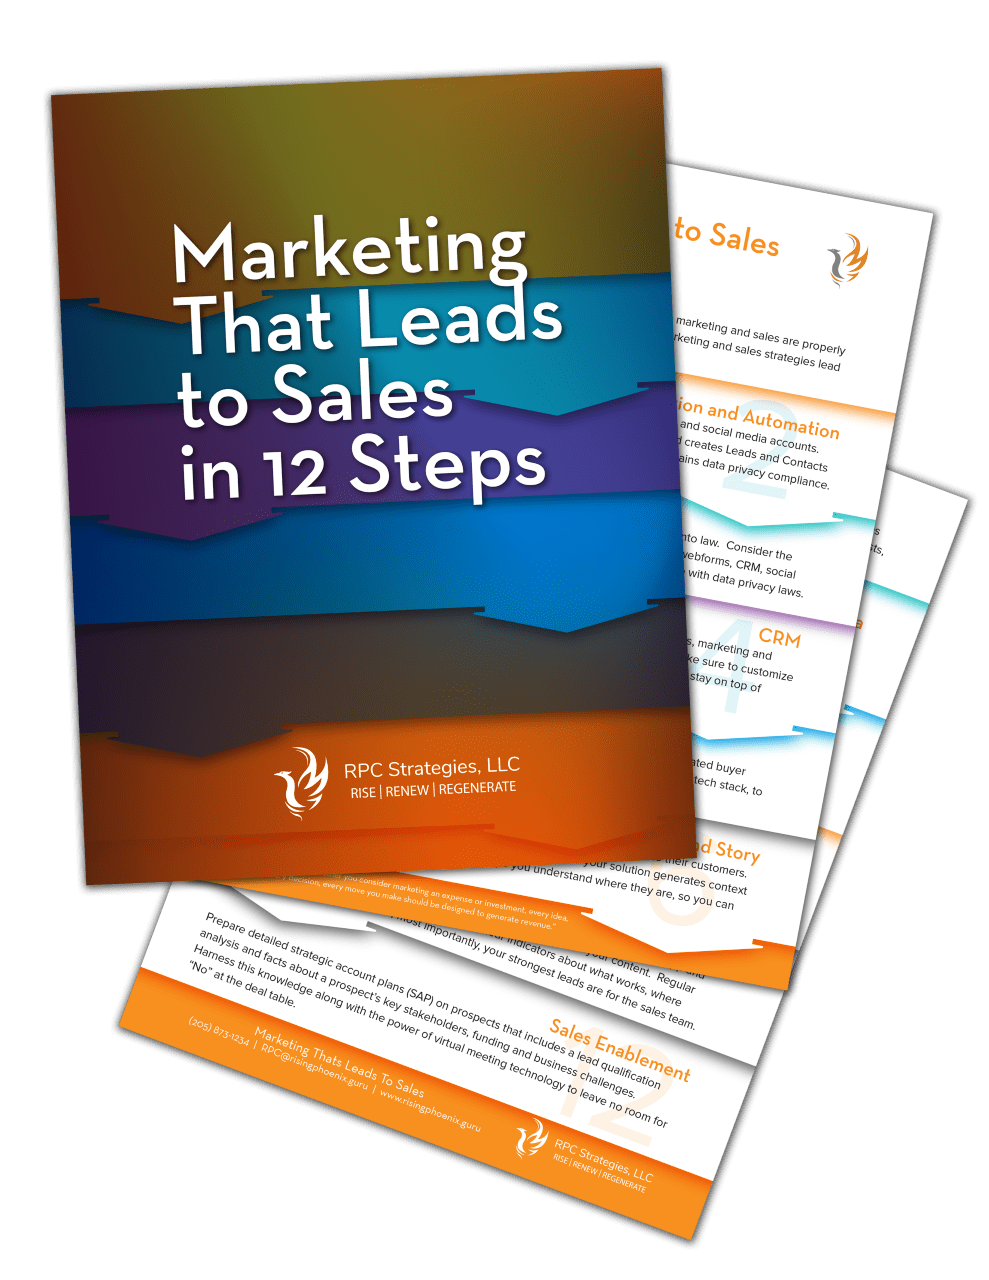 Marketing That Leads to Sales in 12 Steps